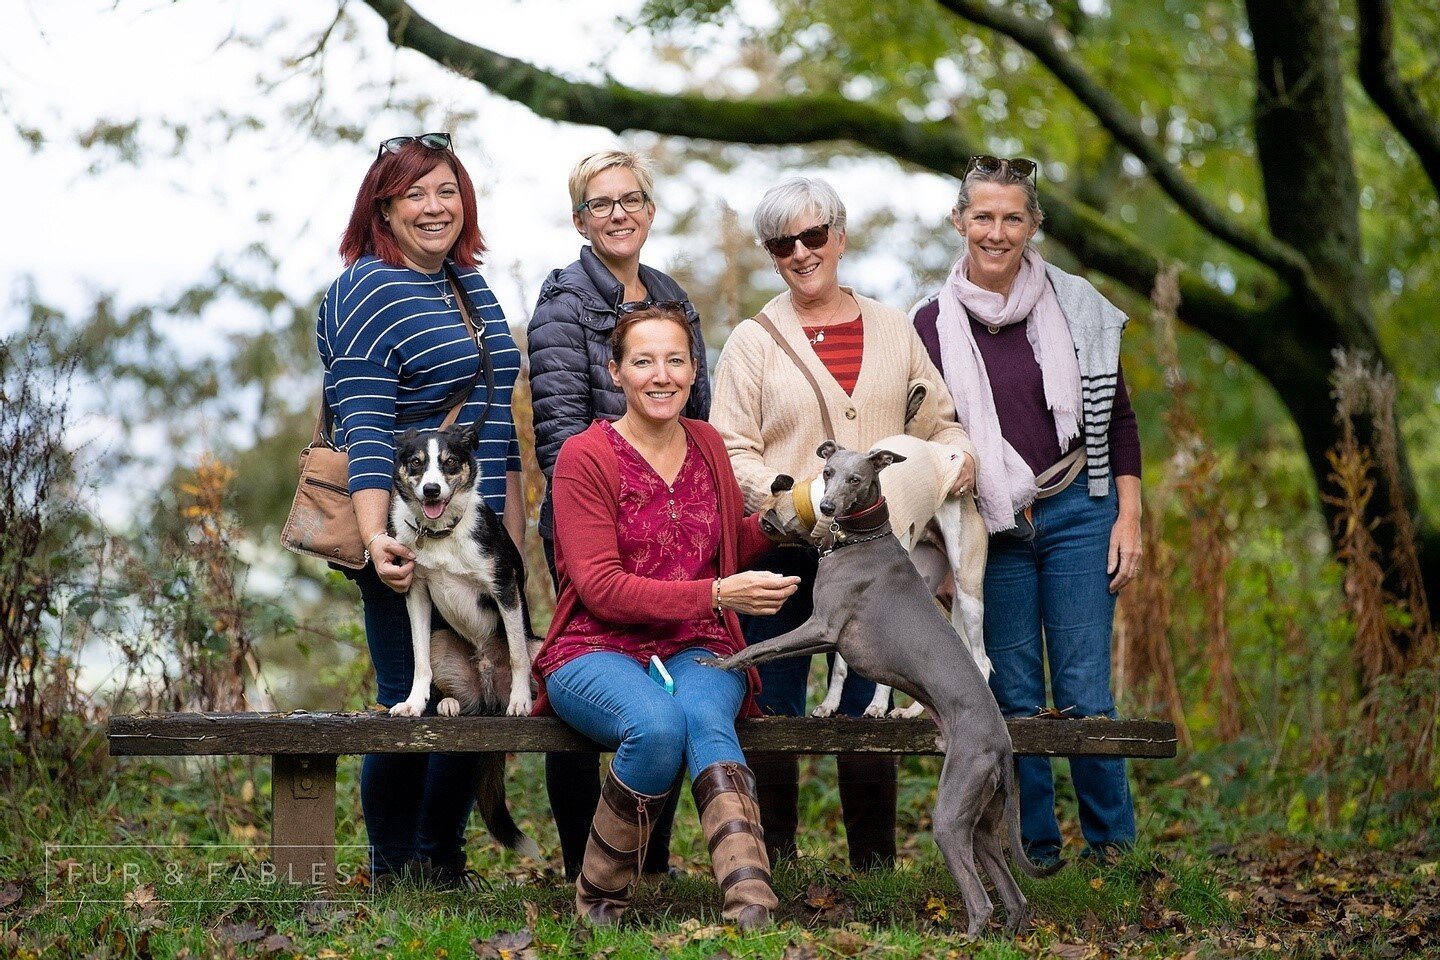 Have you become friends with someone you have met on social media? I'm super lucky to have met some amazing people &amp; dogs who have become friends, including these ladies who all also run small dog brands!

Pre-covid we would try and meet up once 